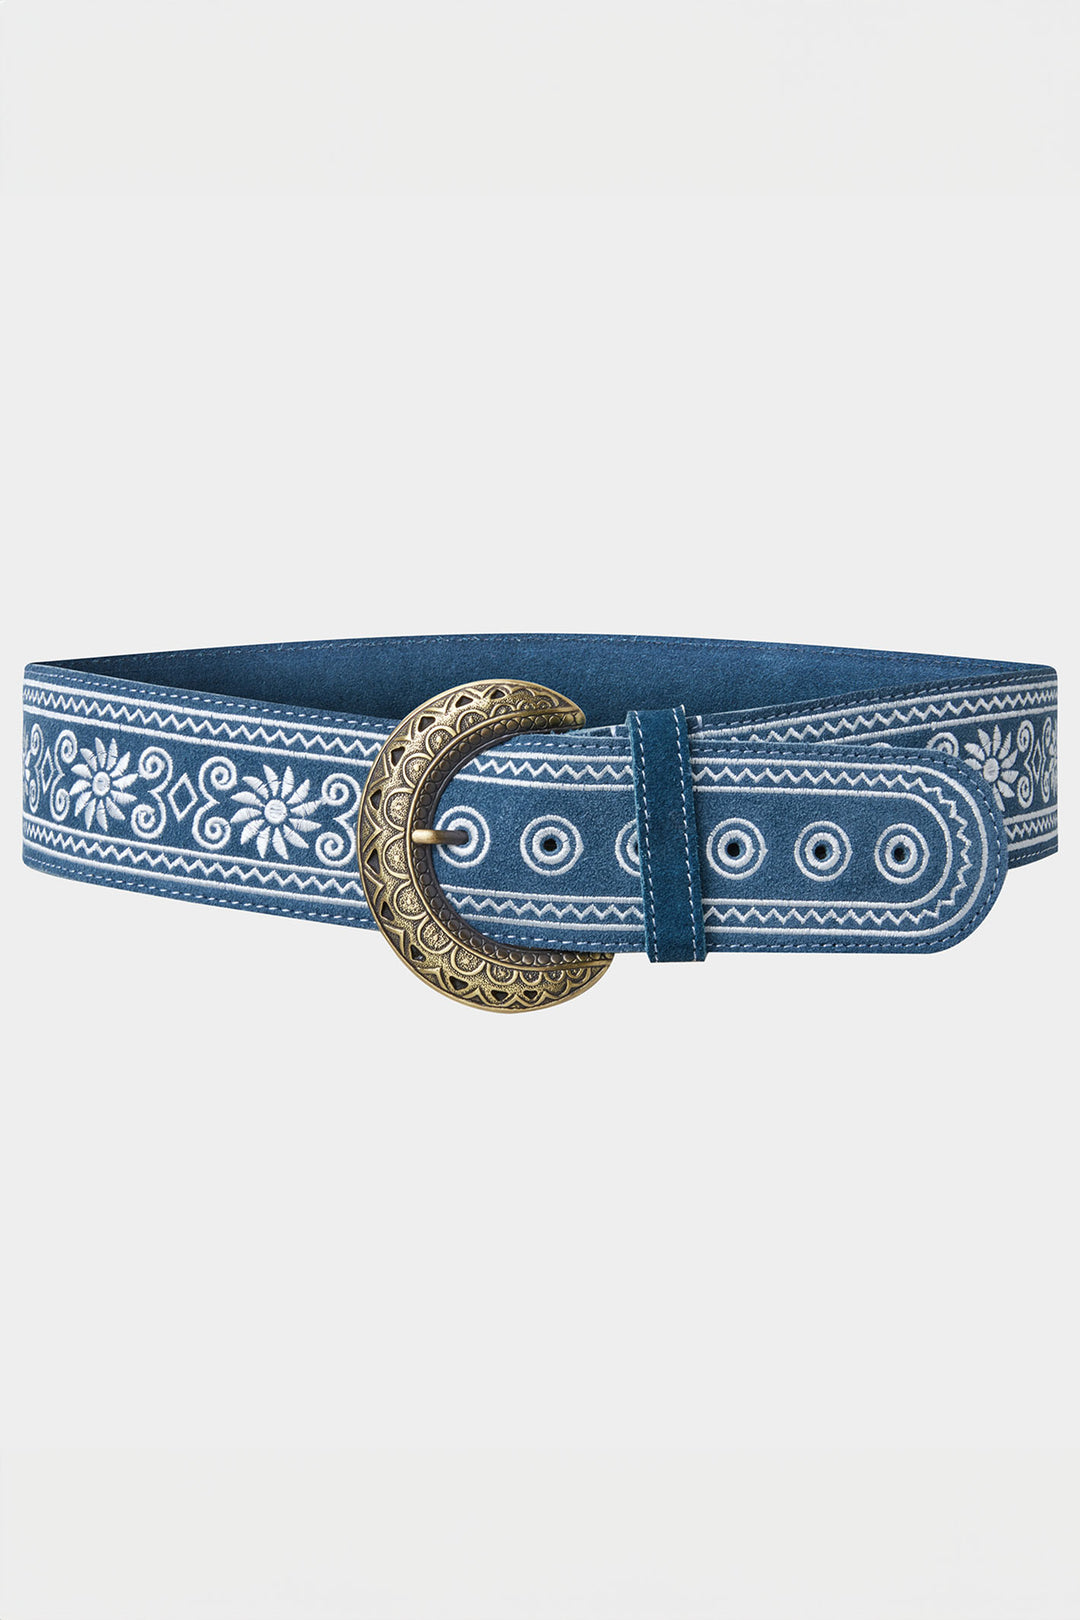 Joe Browns HB399A Into The Blues Embroidered Leather Suede Belt - Experience Boutique